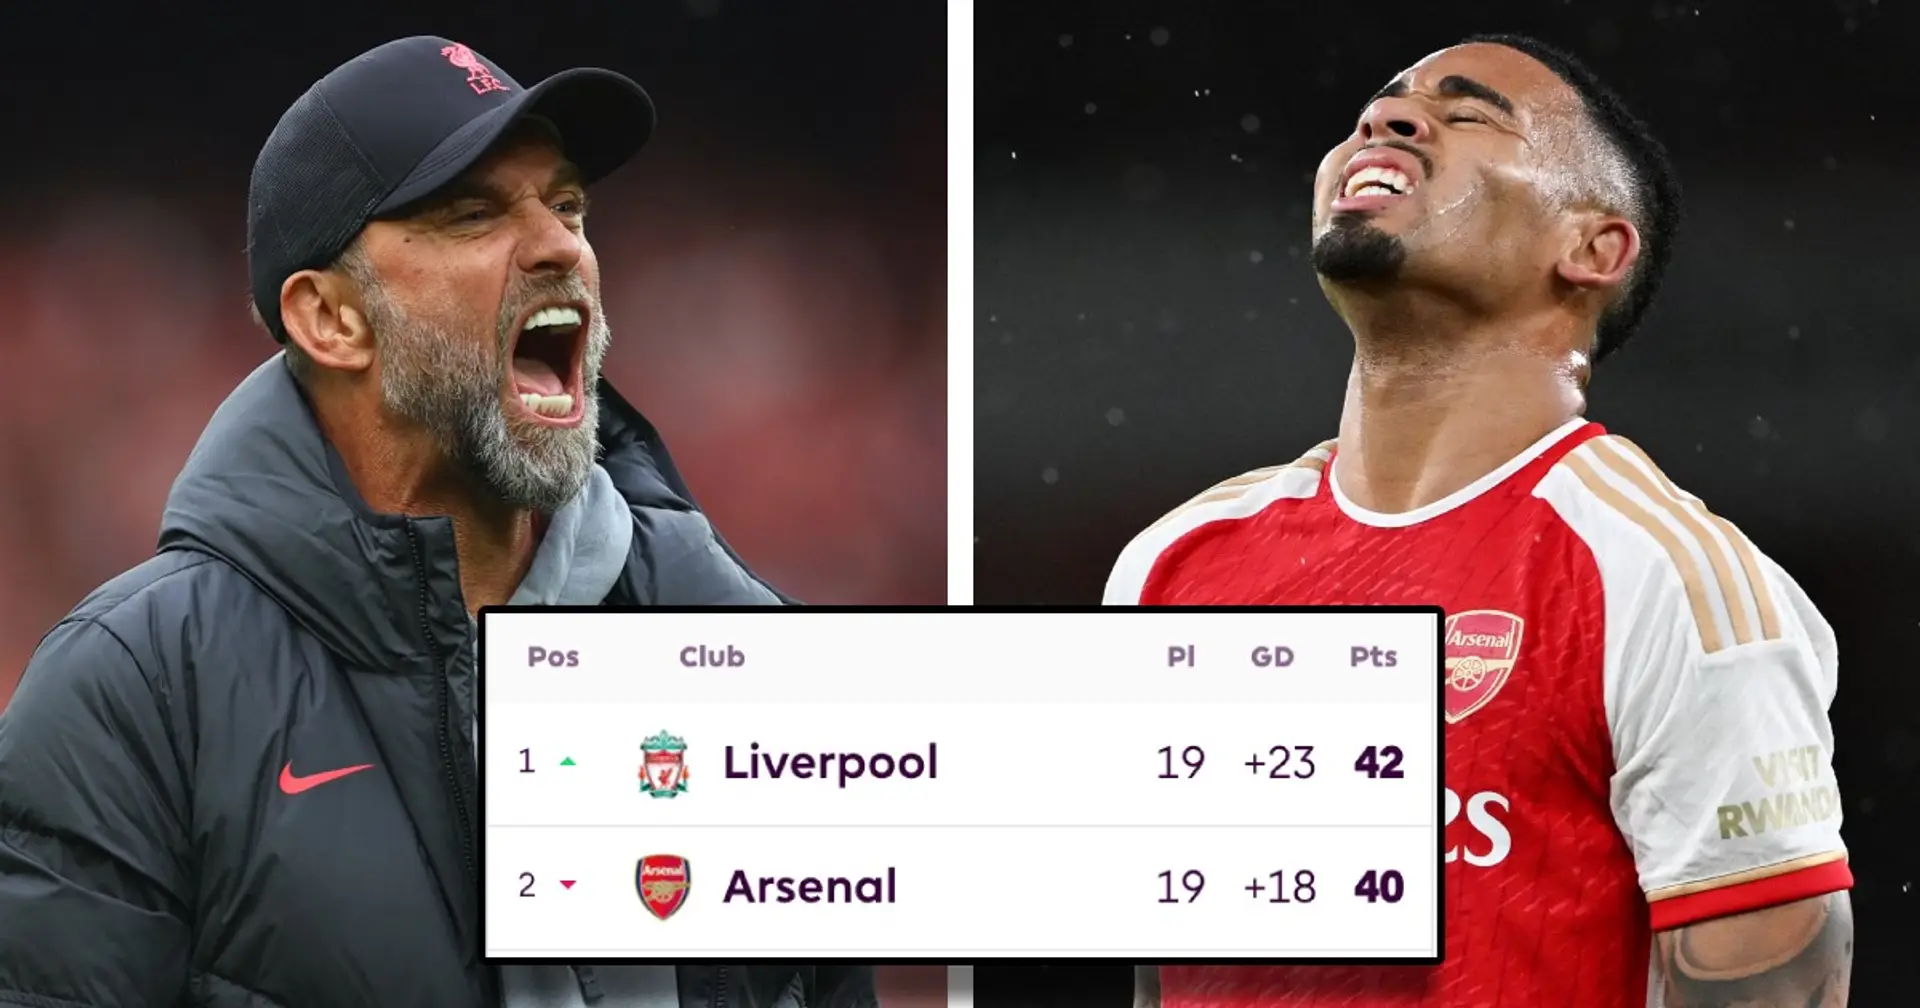 'God this is going to be stressful': Fans react as Liverpool stay ahead of Arsenal in title-race